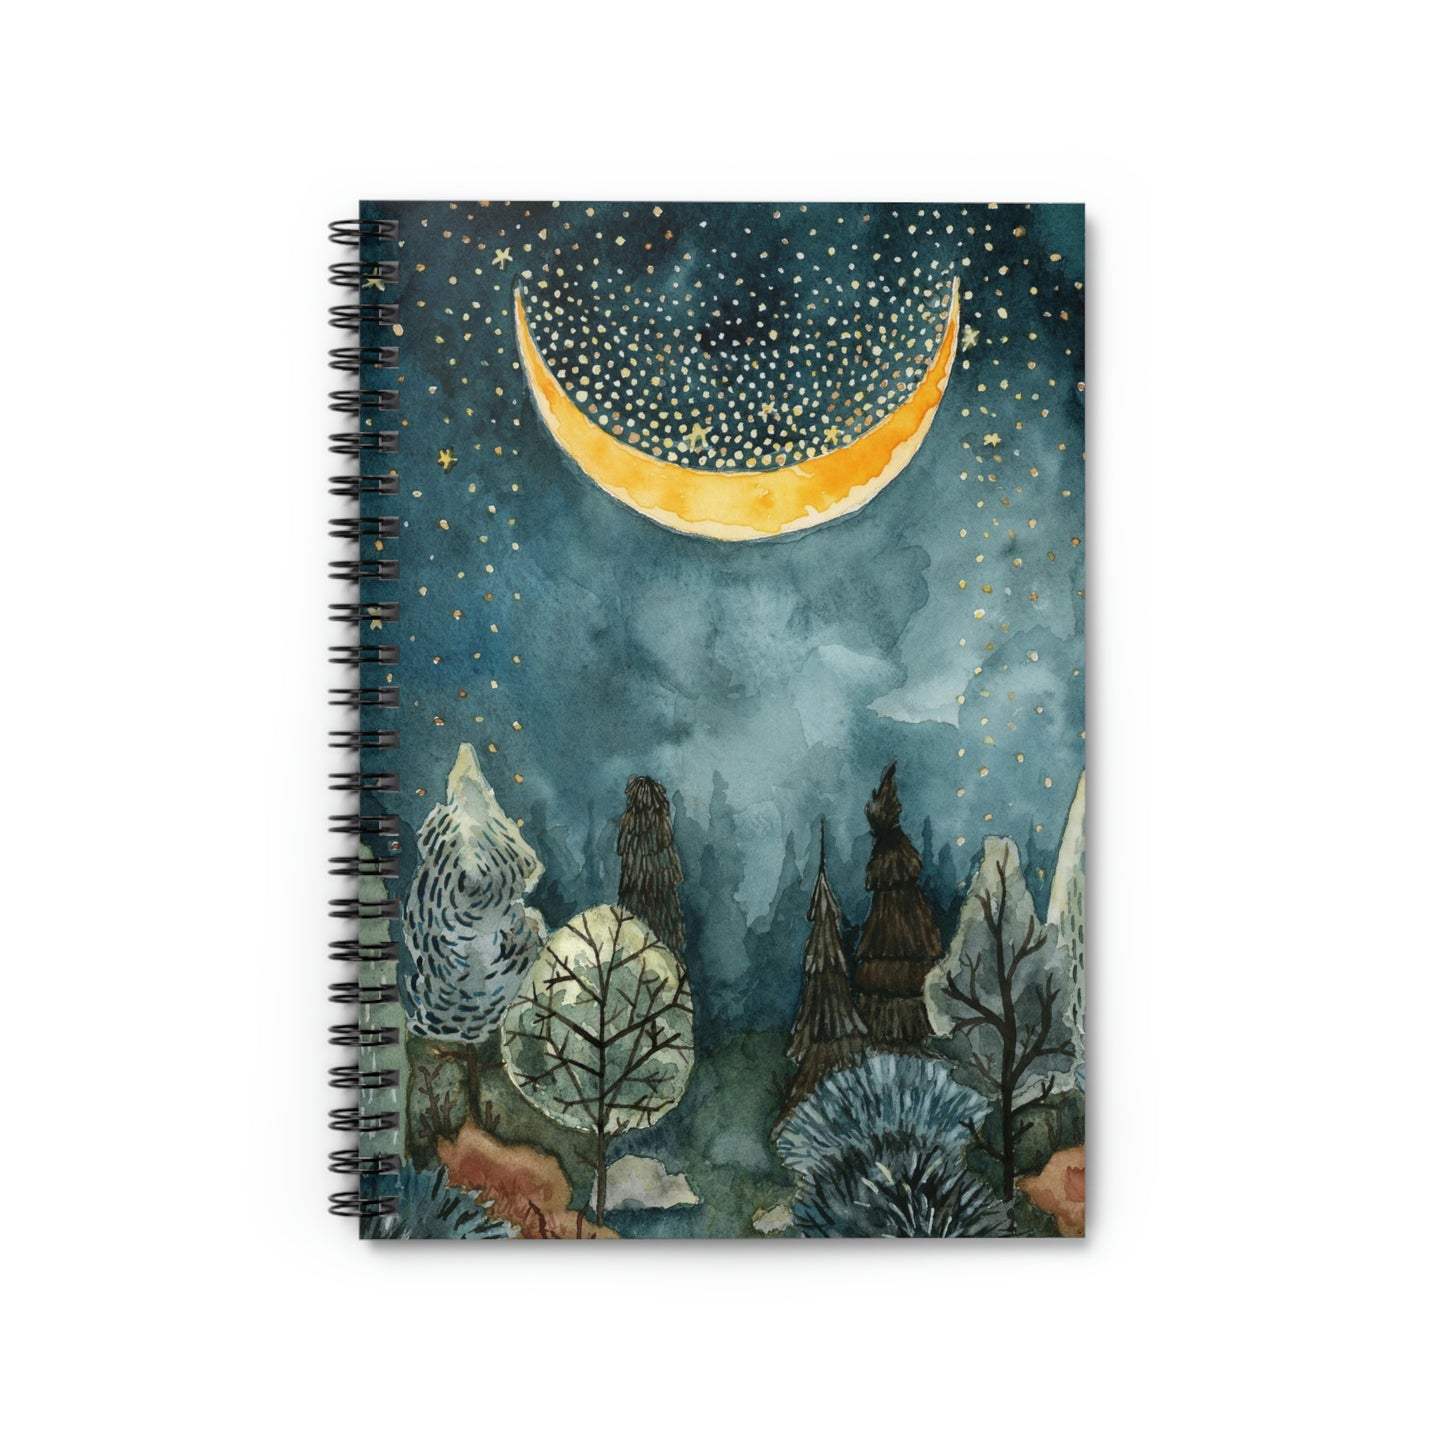 Moon Forest Spiral Notebook - Ruled Line